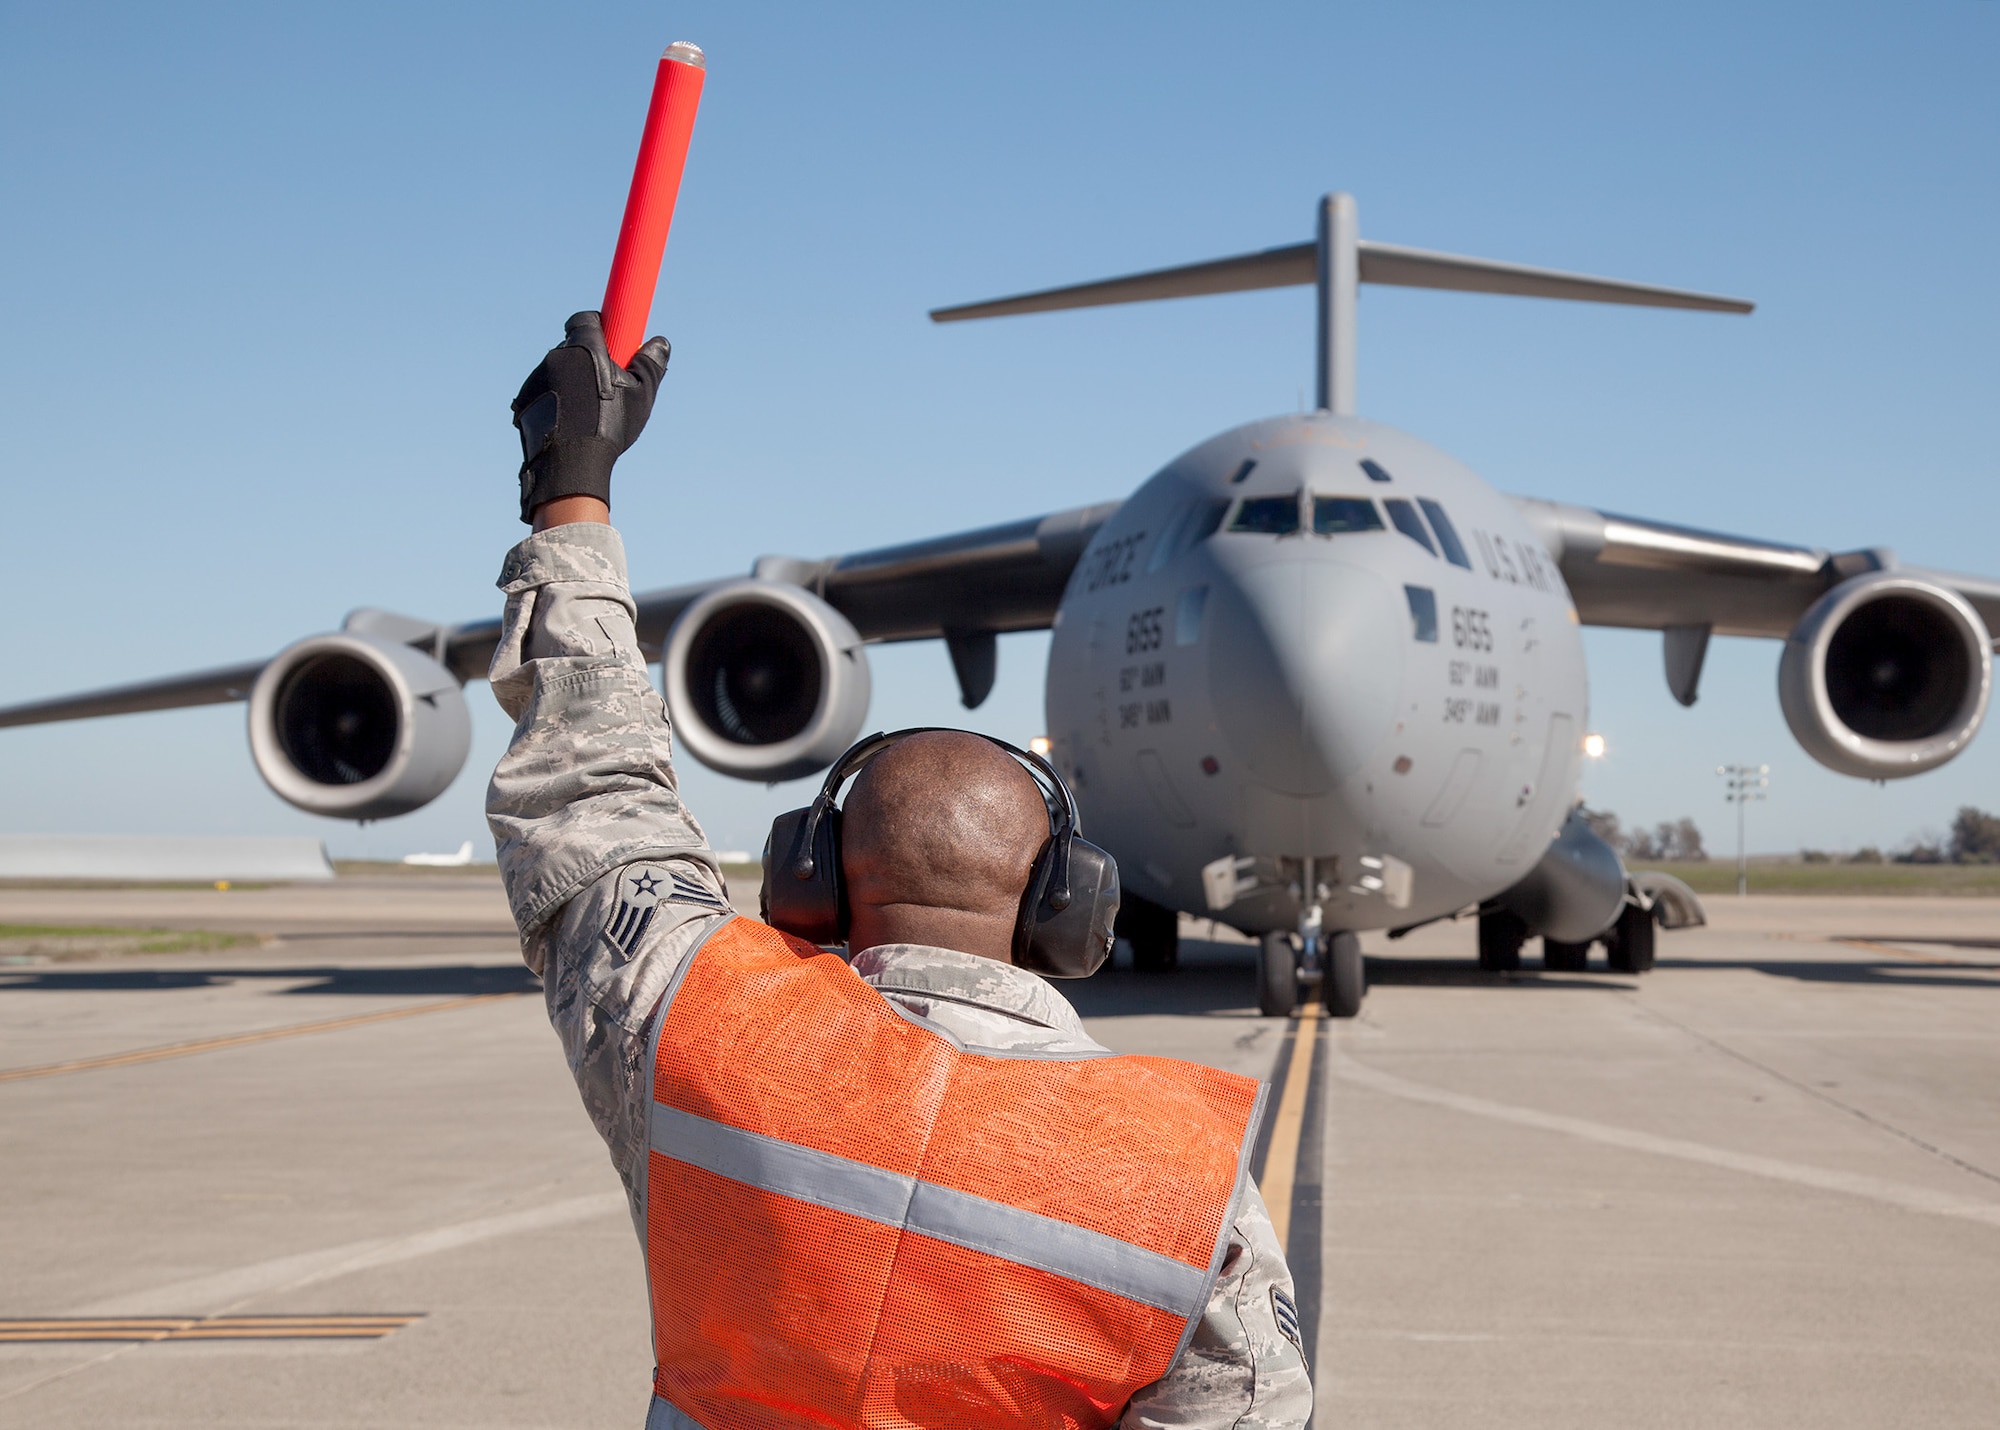 TRAVIS AIR FORCE BASE, Calif. -- Senior Airman Kwame T. Ntutela, a crew chief with the 945th Aircraft Maintenance Squadron, recovers a C-17 Globemaster III at at Travis Air Force Base, Calif., Feb. 23, 2014. During the Unit Training Assembly of Feb. 22-23, squadrons from across the 349th Air Mobility Wing conducted interrelated exercise scenarios, providing Reservists opportunities to achieve core skill proficiency training.   On this particular aeromedical evacuation sortie,  key training events were achieved for members from the 349th Operations, Maintenance, Support and Medical Groups. (U.S. Air Force photo / Lt. Col. Robert Couse-Baker)